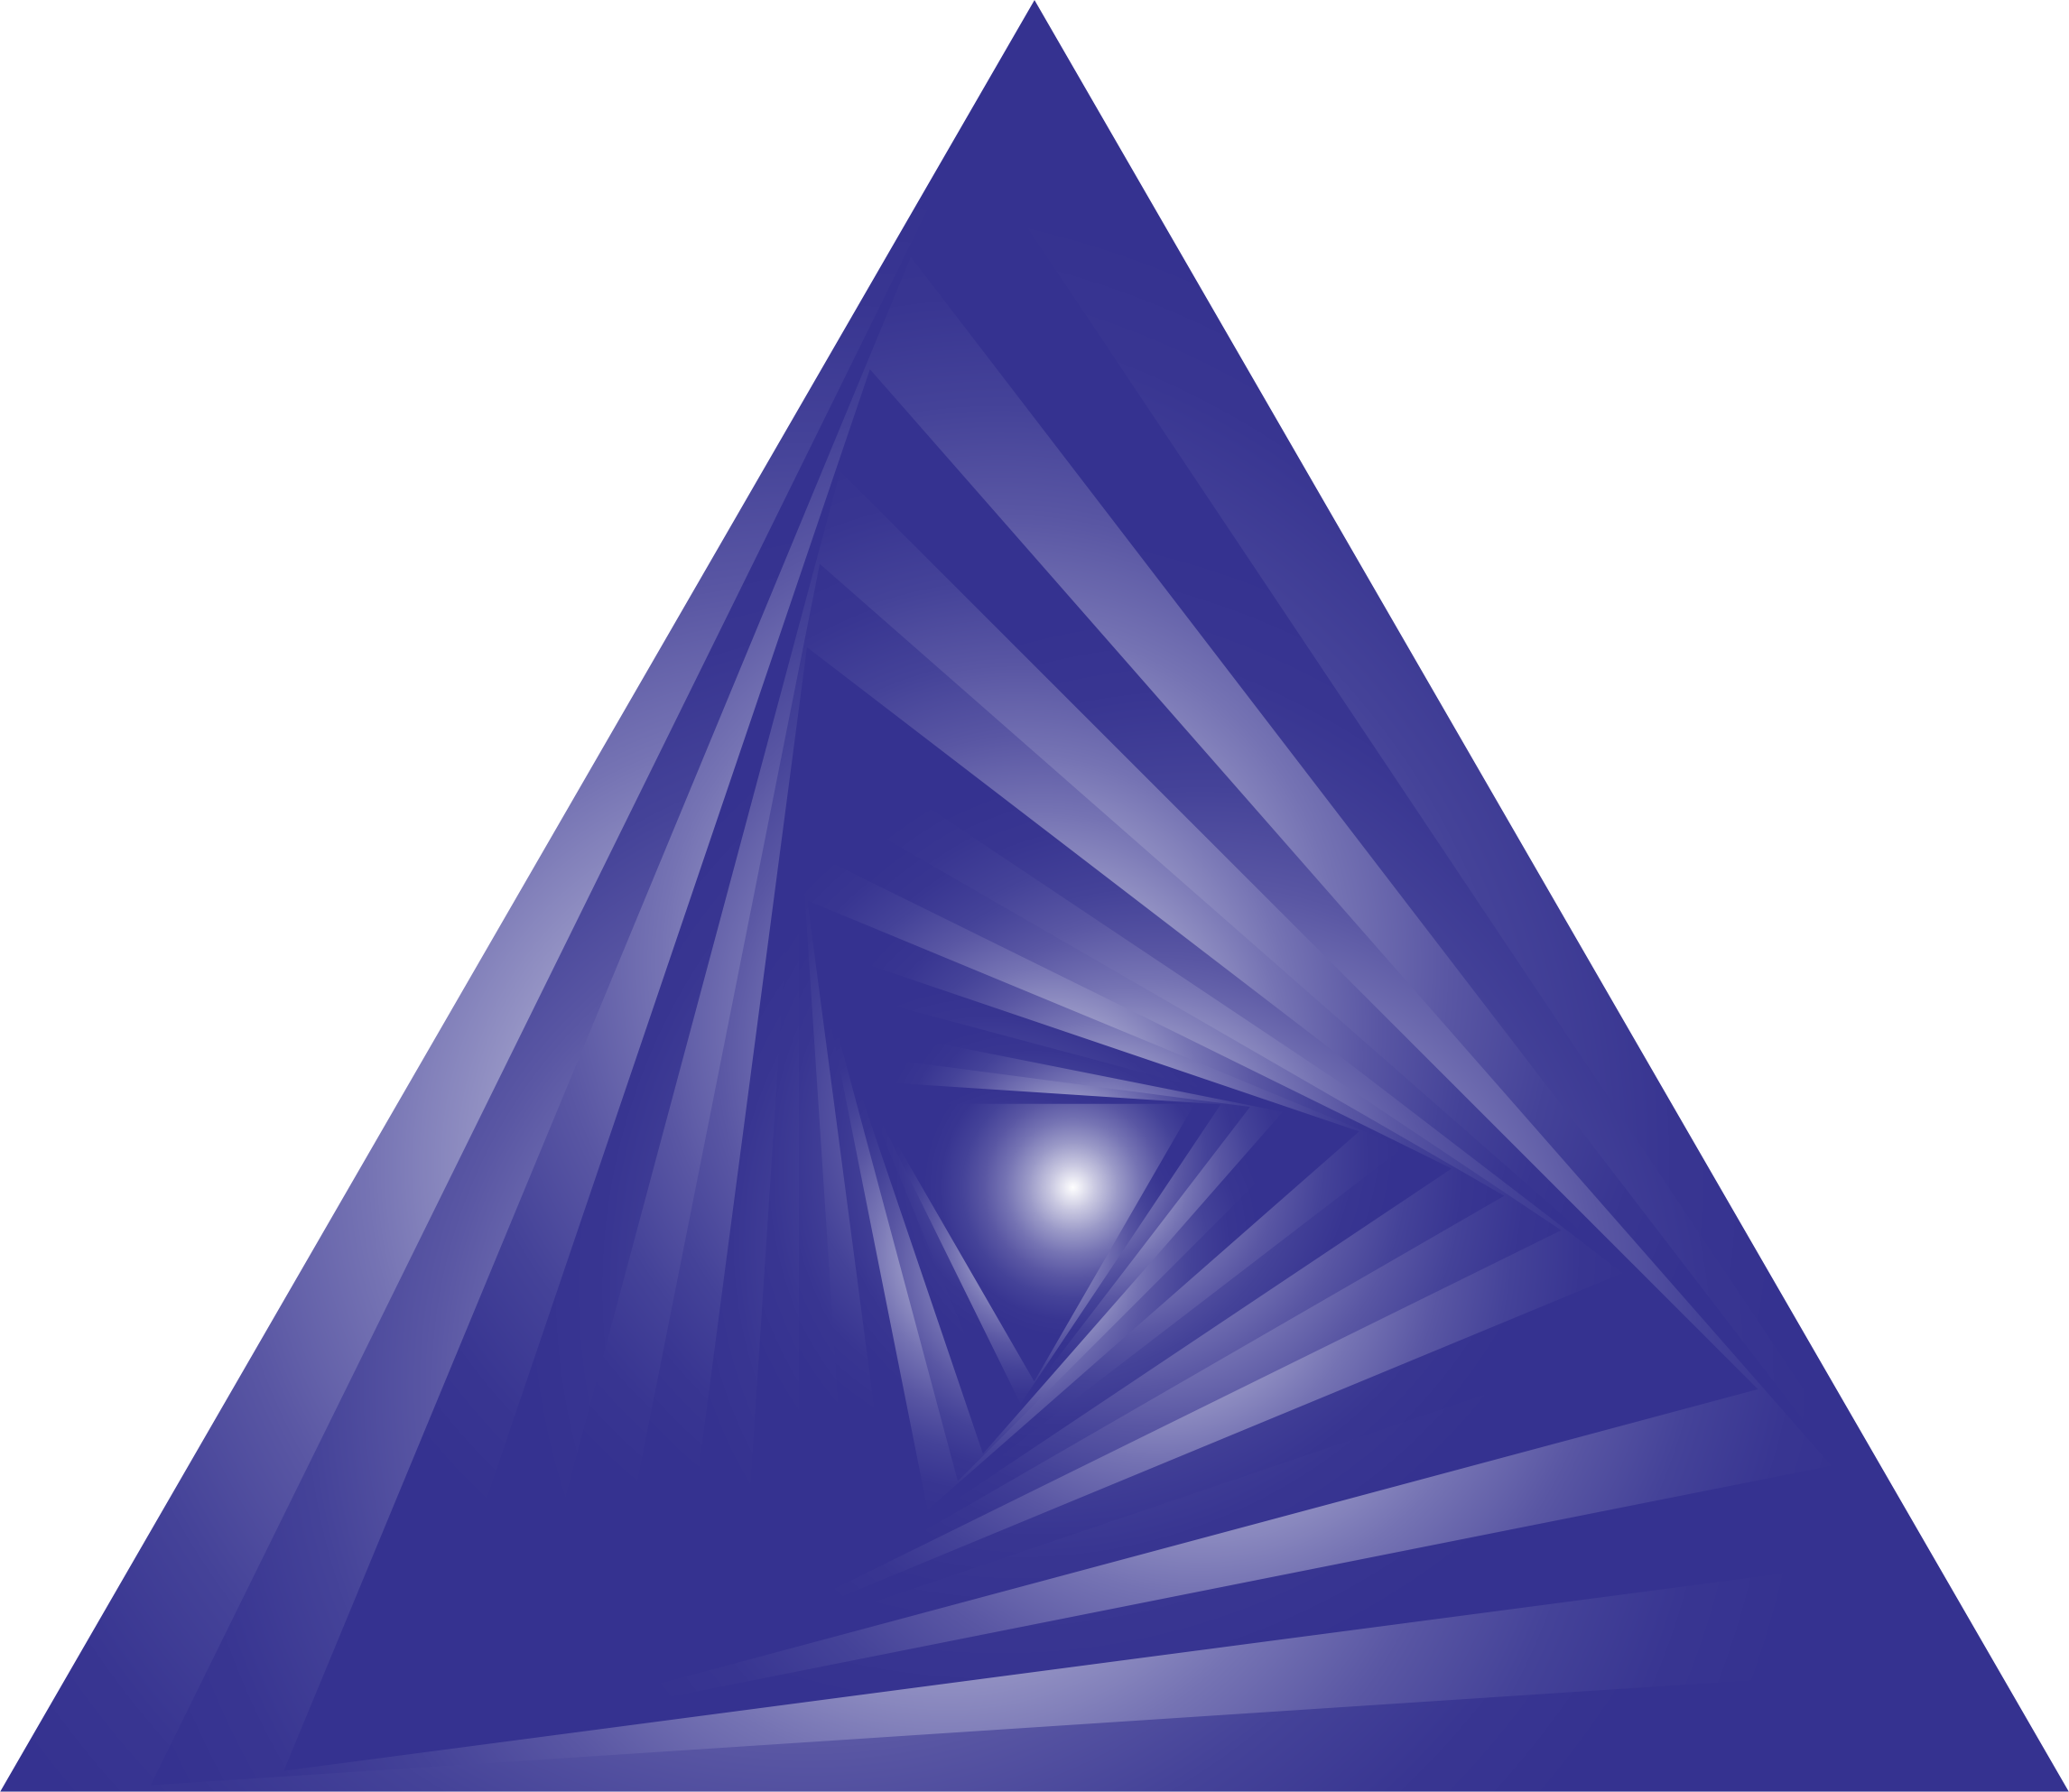 A Blue Triangle With A White Light In The Center